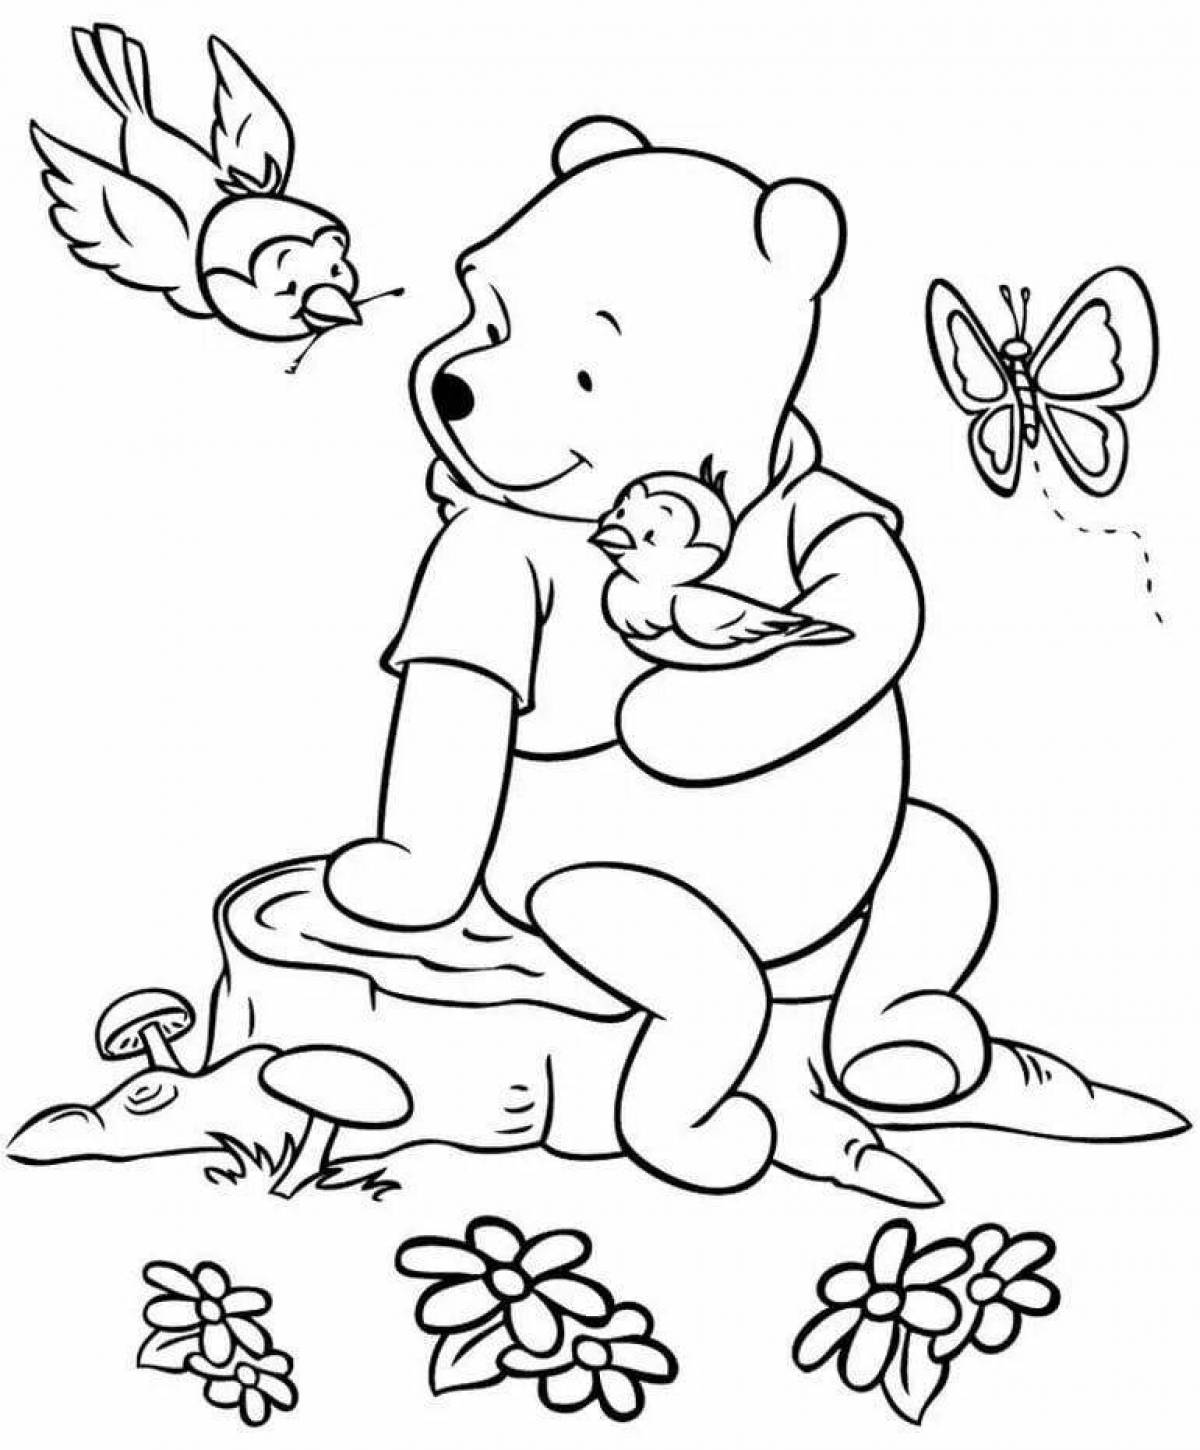 Coloring page glorious winnie the pooh